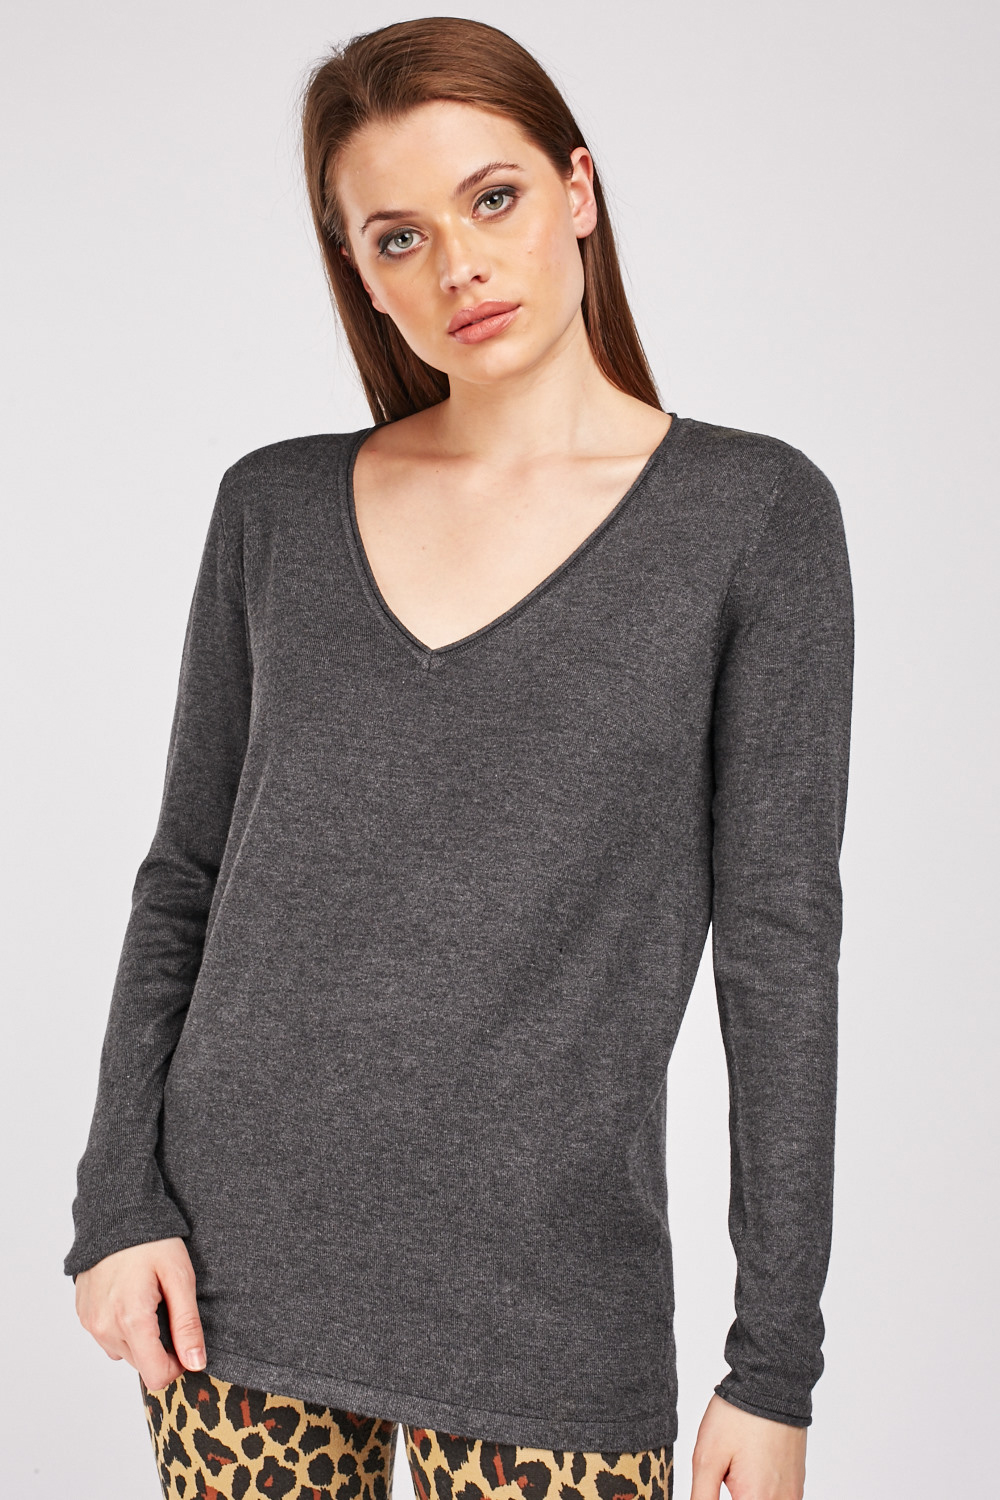 Women's Cashmere Sweaters - Our collection